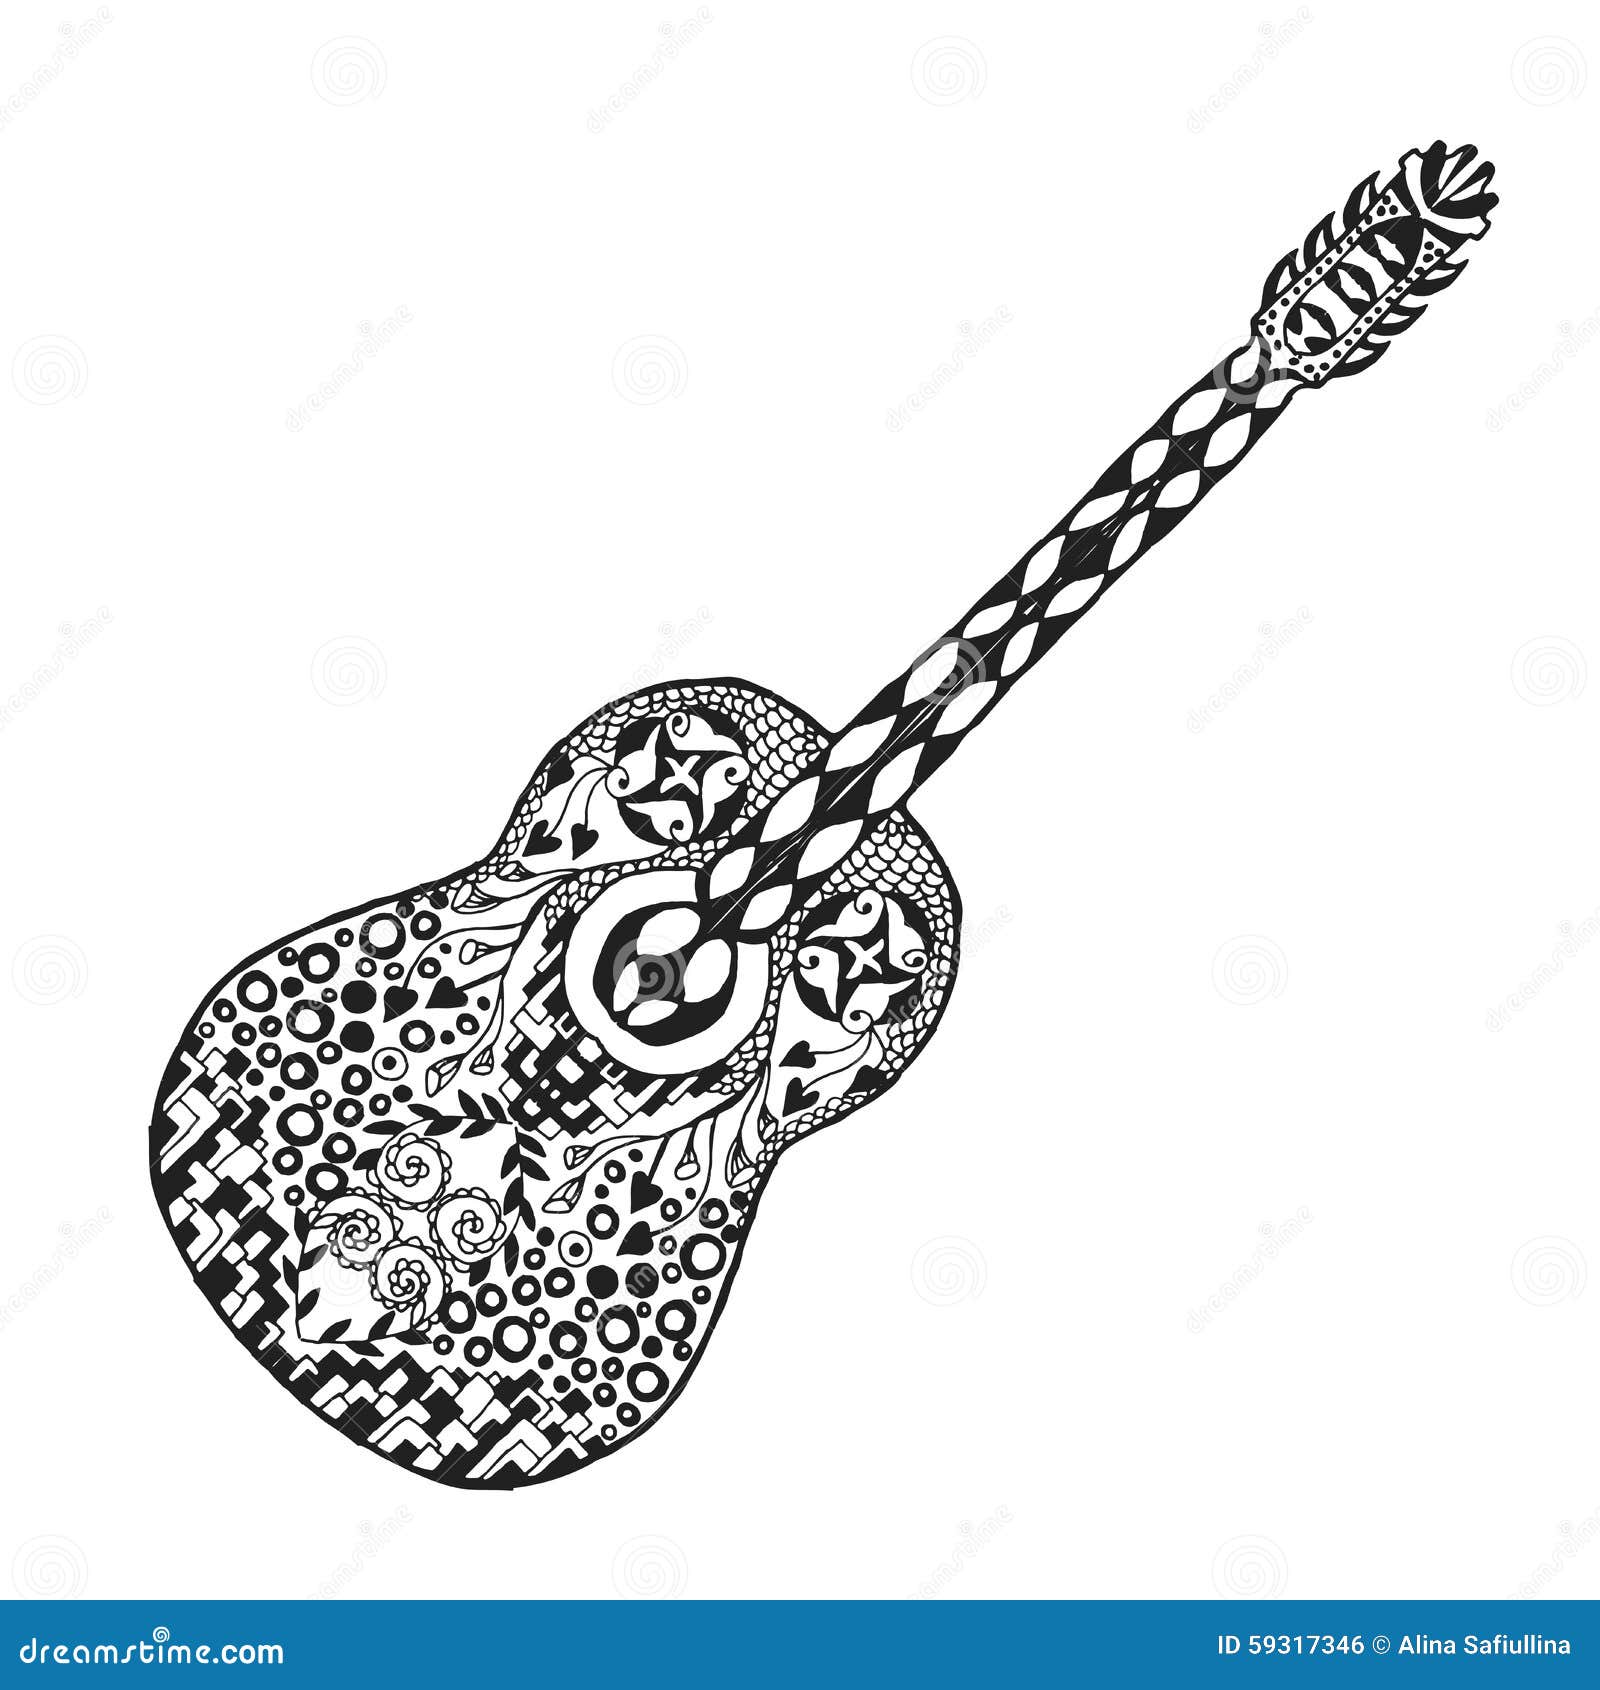 Buy Small Guitar Tattoo Online In India - Etsy India